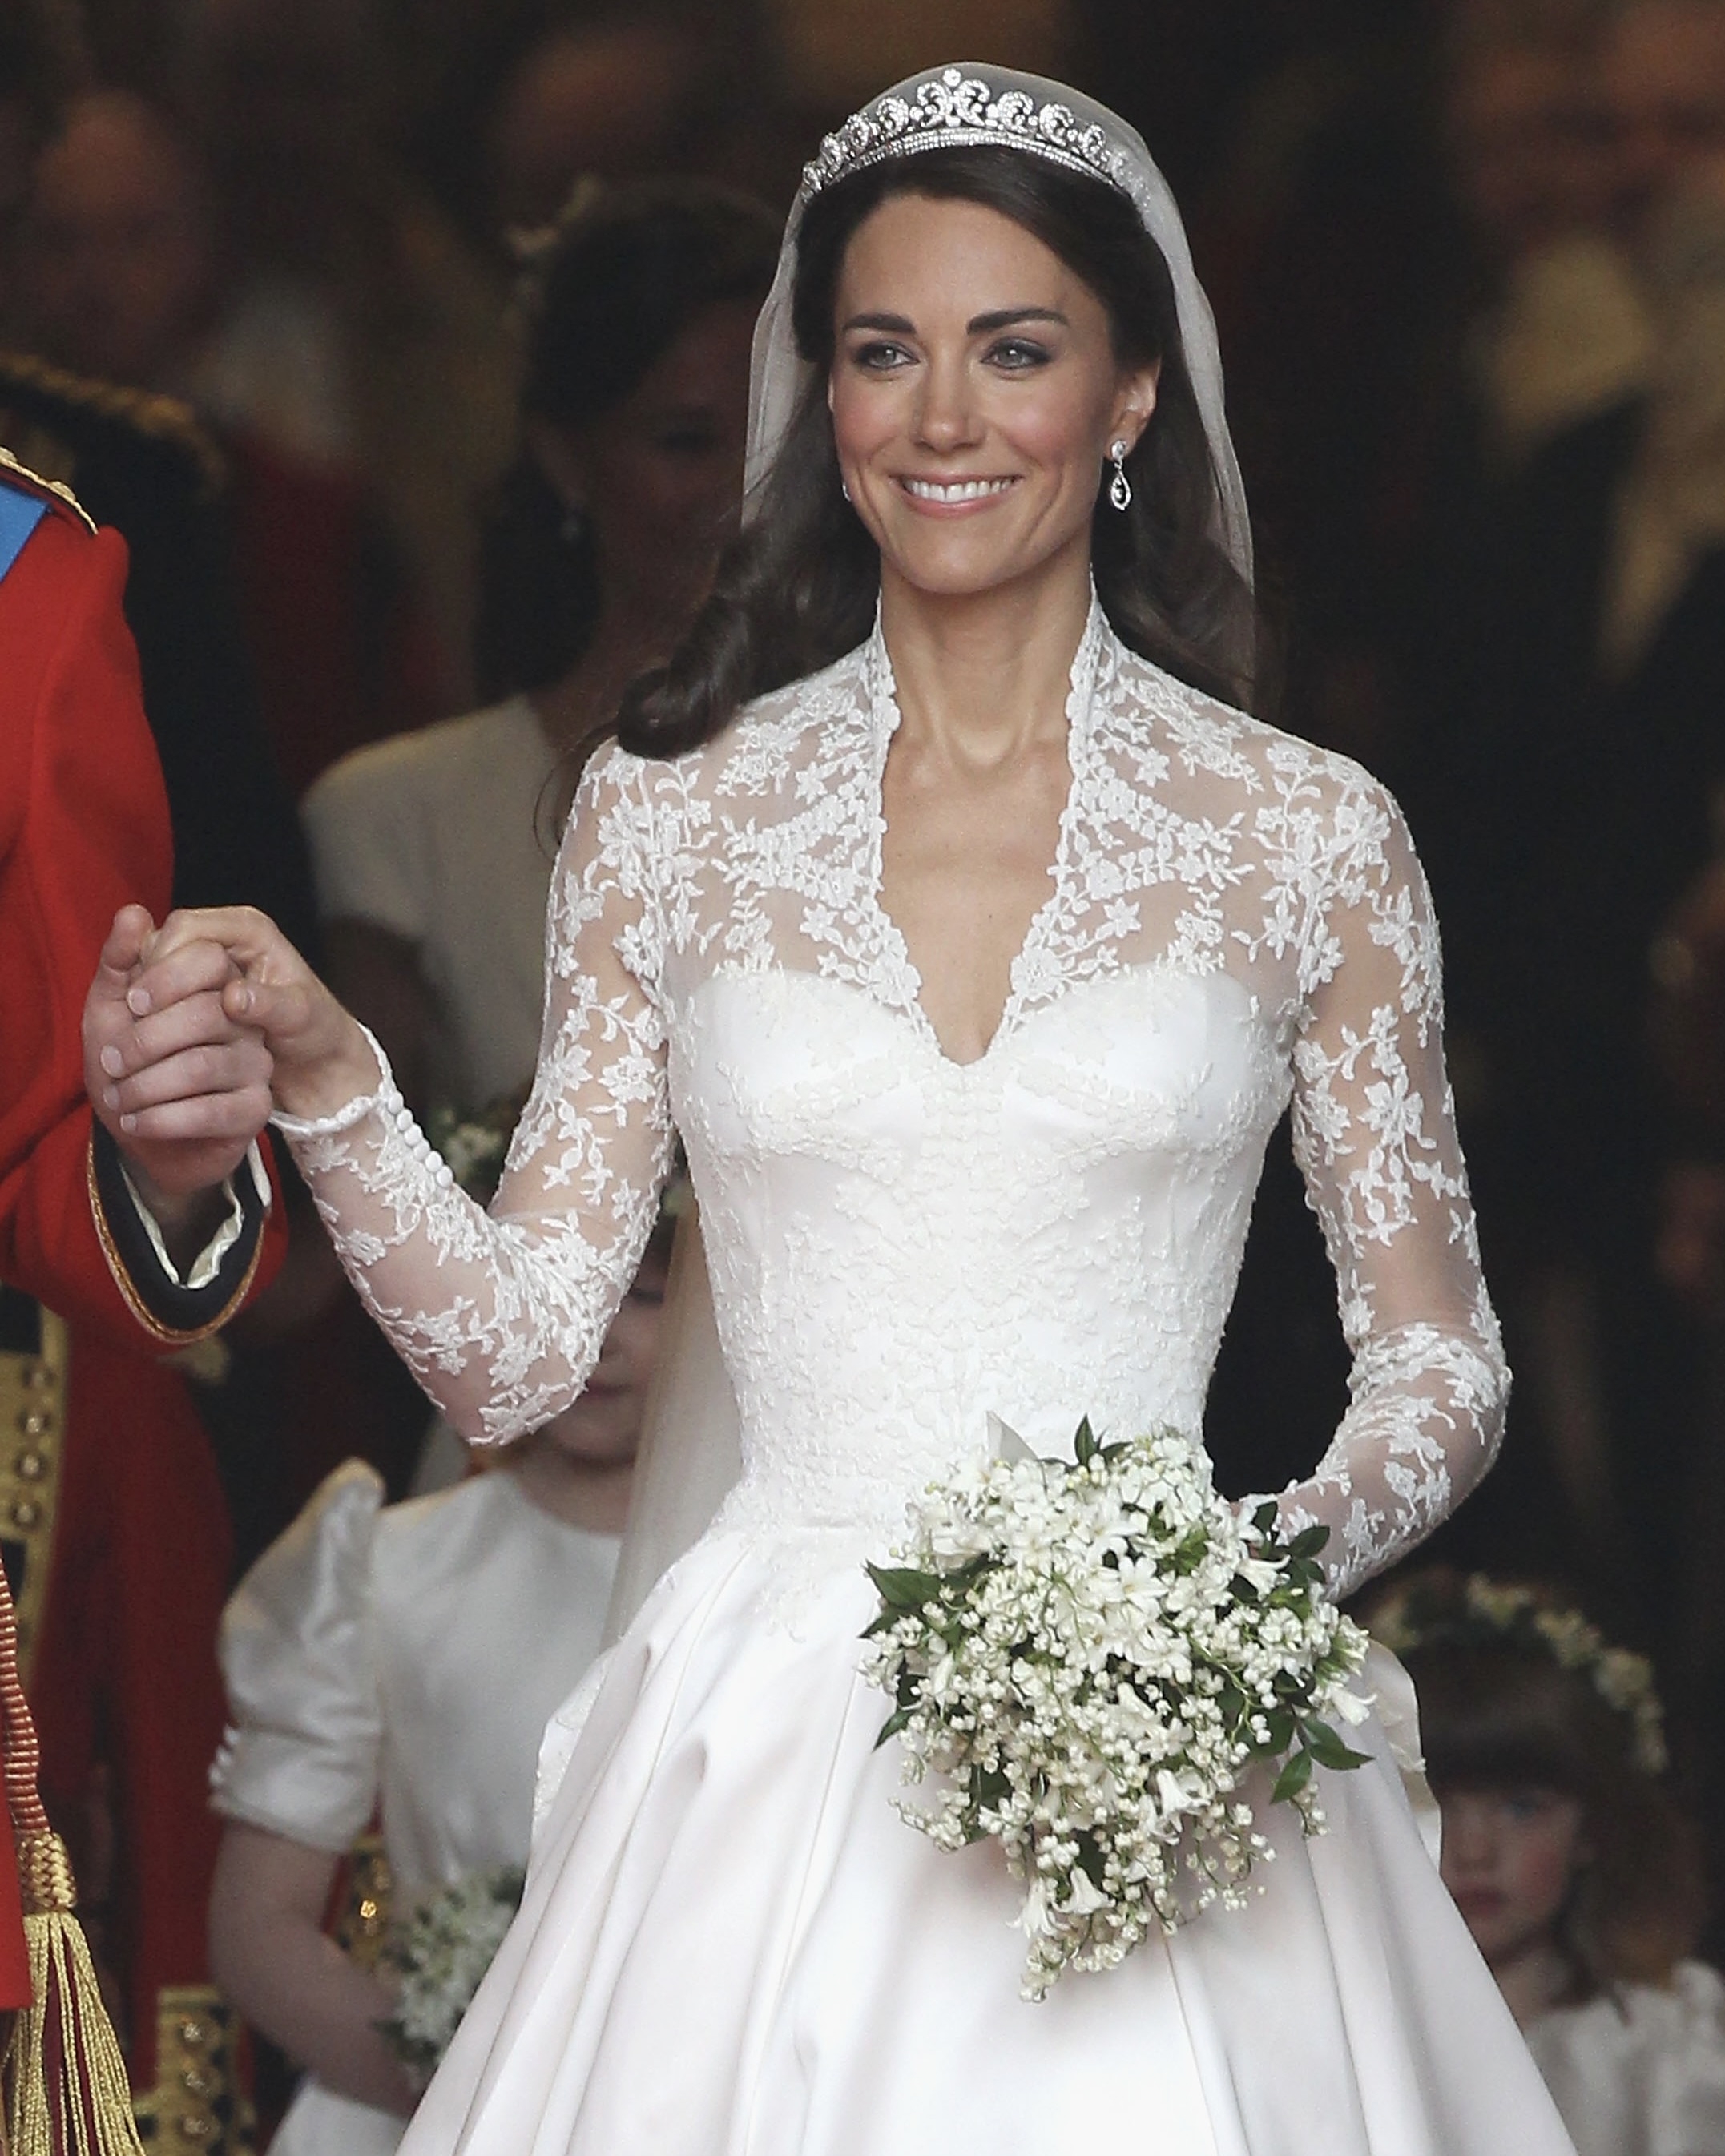 Kate Middleton wore the historic royal natural diamond Cartier Halo Tiara on her wedding day to Prince William in 2011.